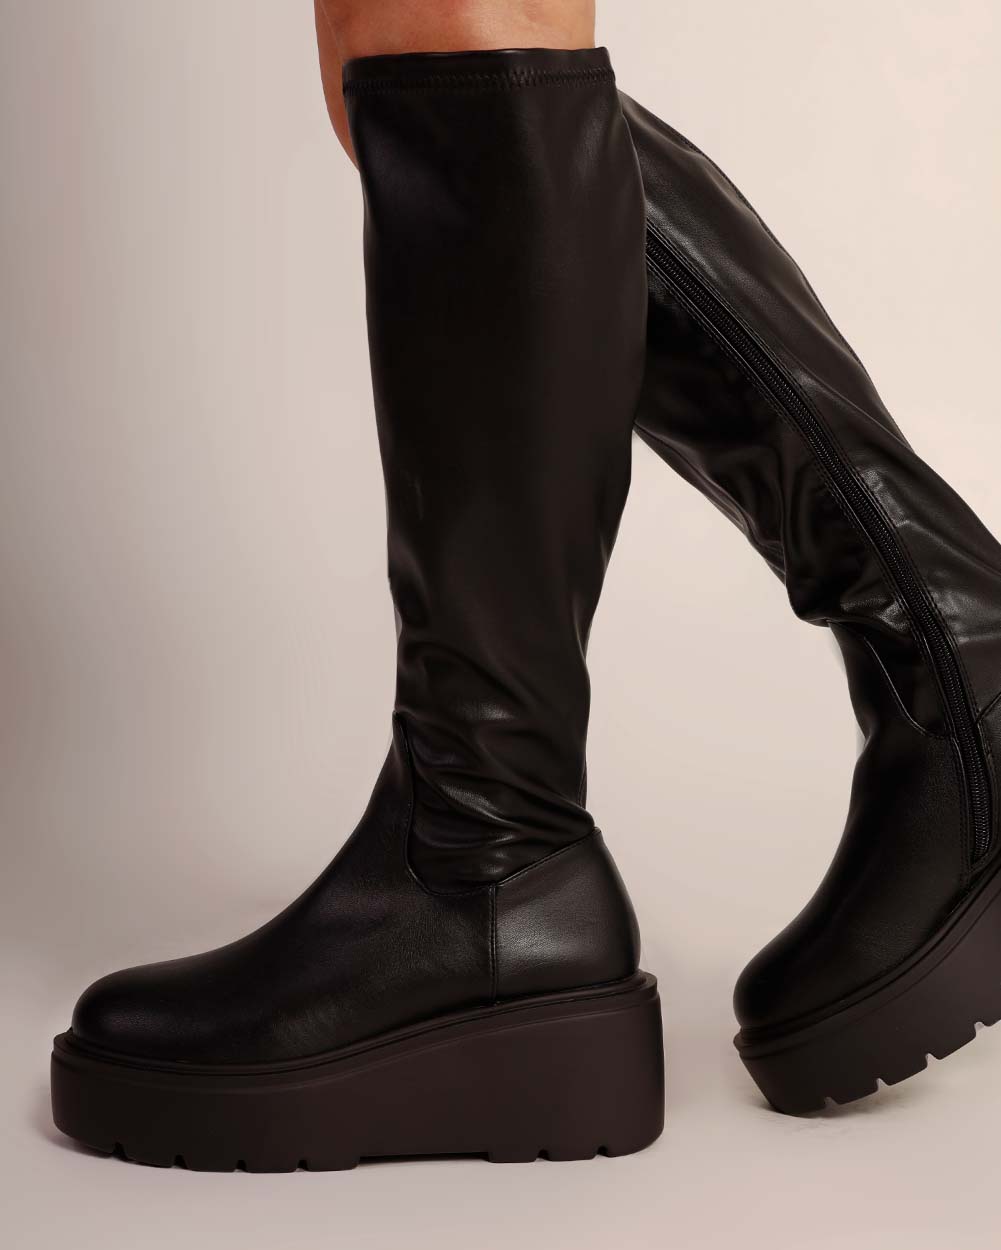 Bad Decisions Knee-High Zip Up Boots-Black-Side